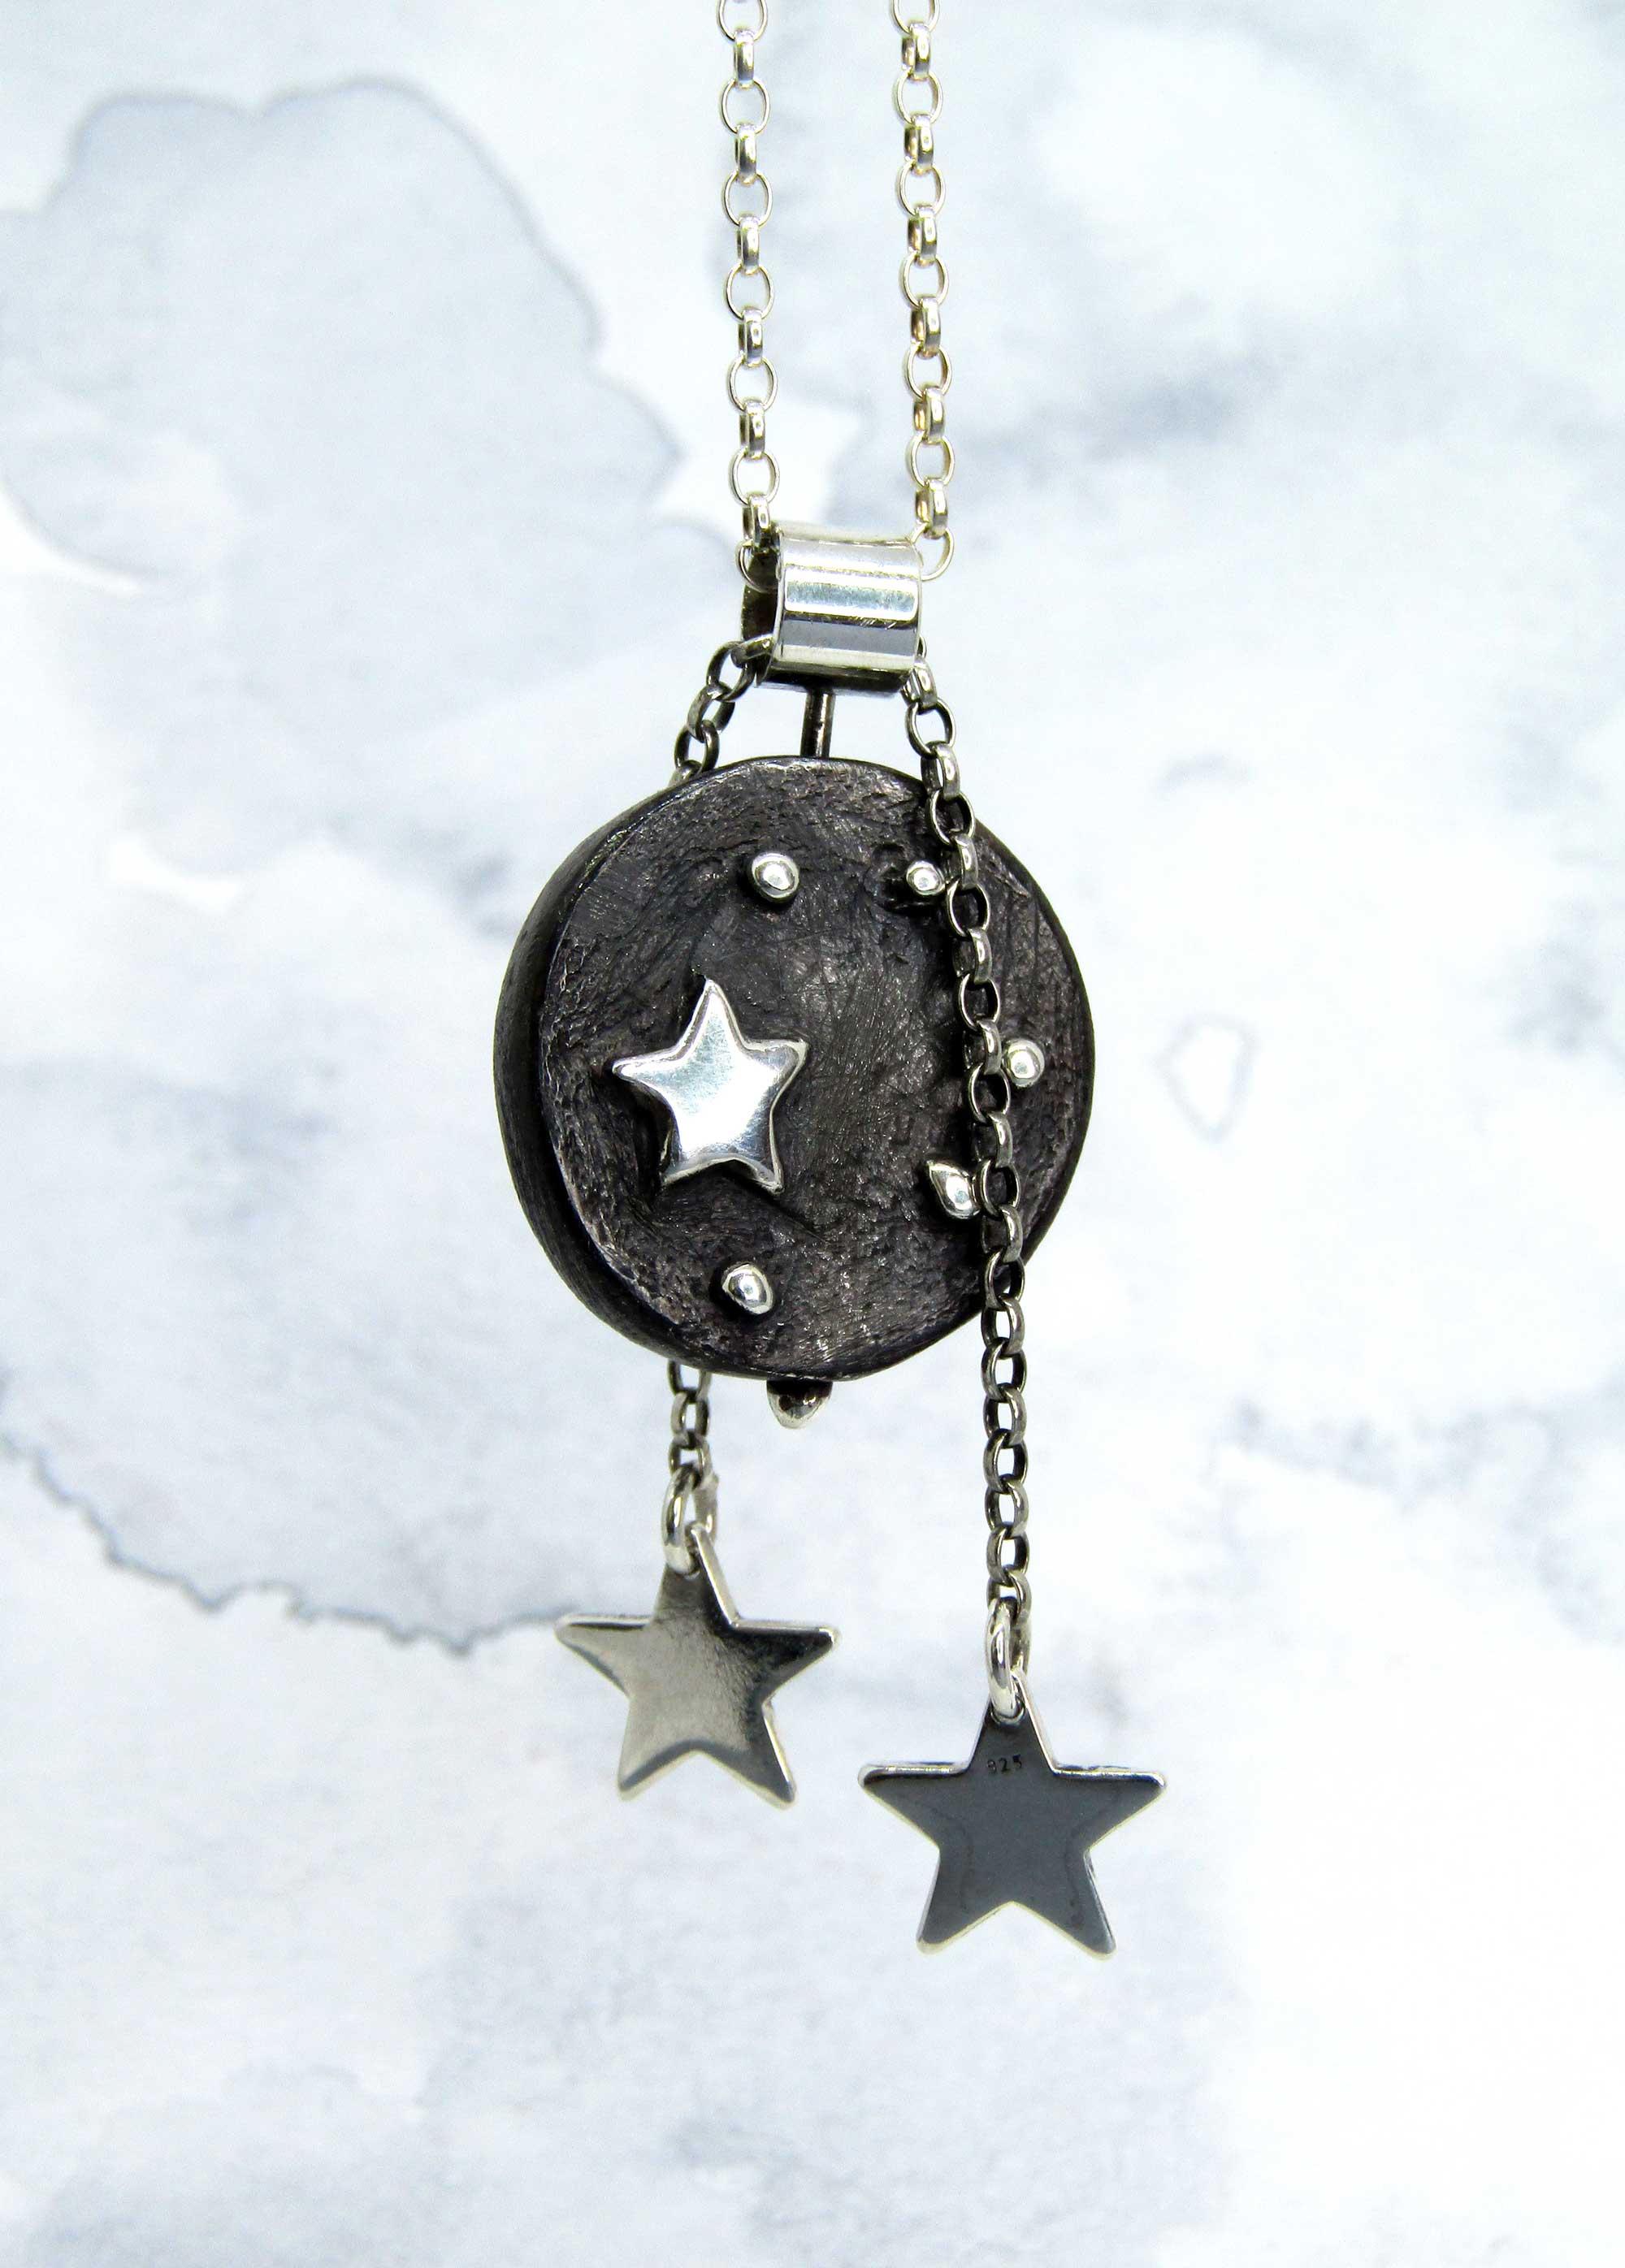 Illuminate pendant. Handmade solid silver pendant with highly polished star detail within a blackened disc.. Music jewellery. Music jewelry.  Irish design. Moveable art